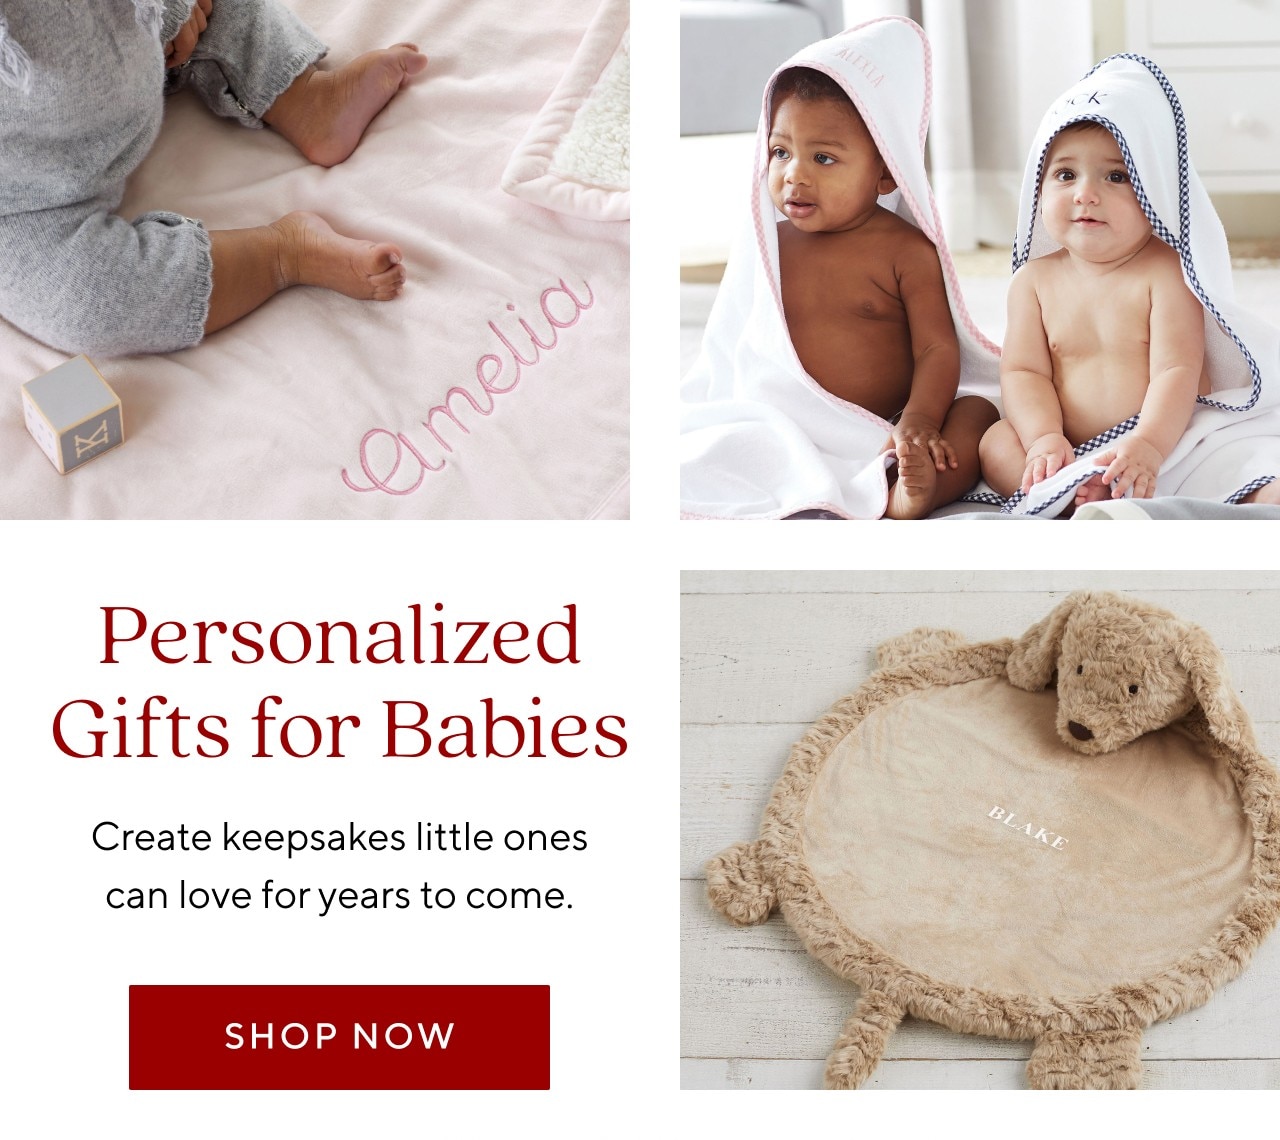 PERSONALIZED GIFTS FOR BABIES